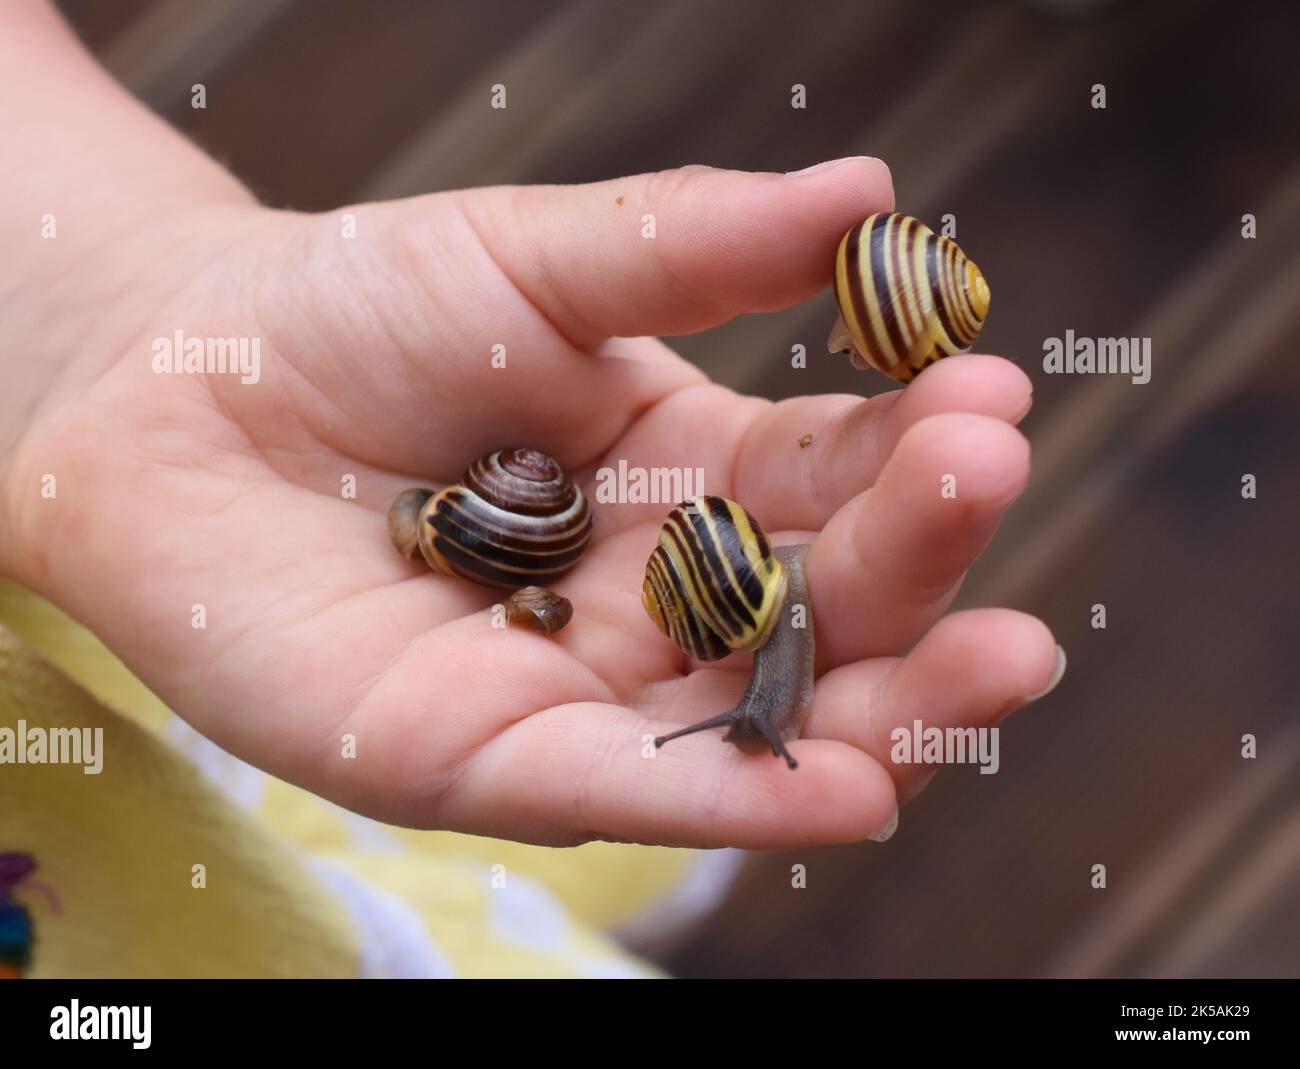 Small child exploring nature holding garden snails in her hands Stock Photo